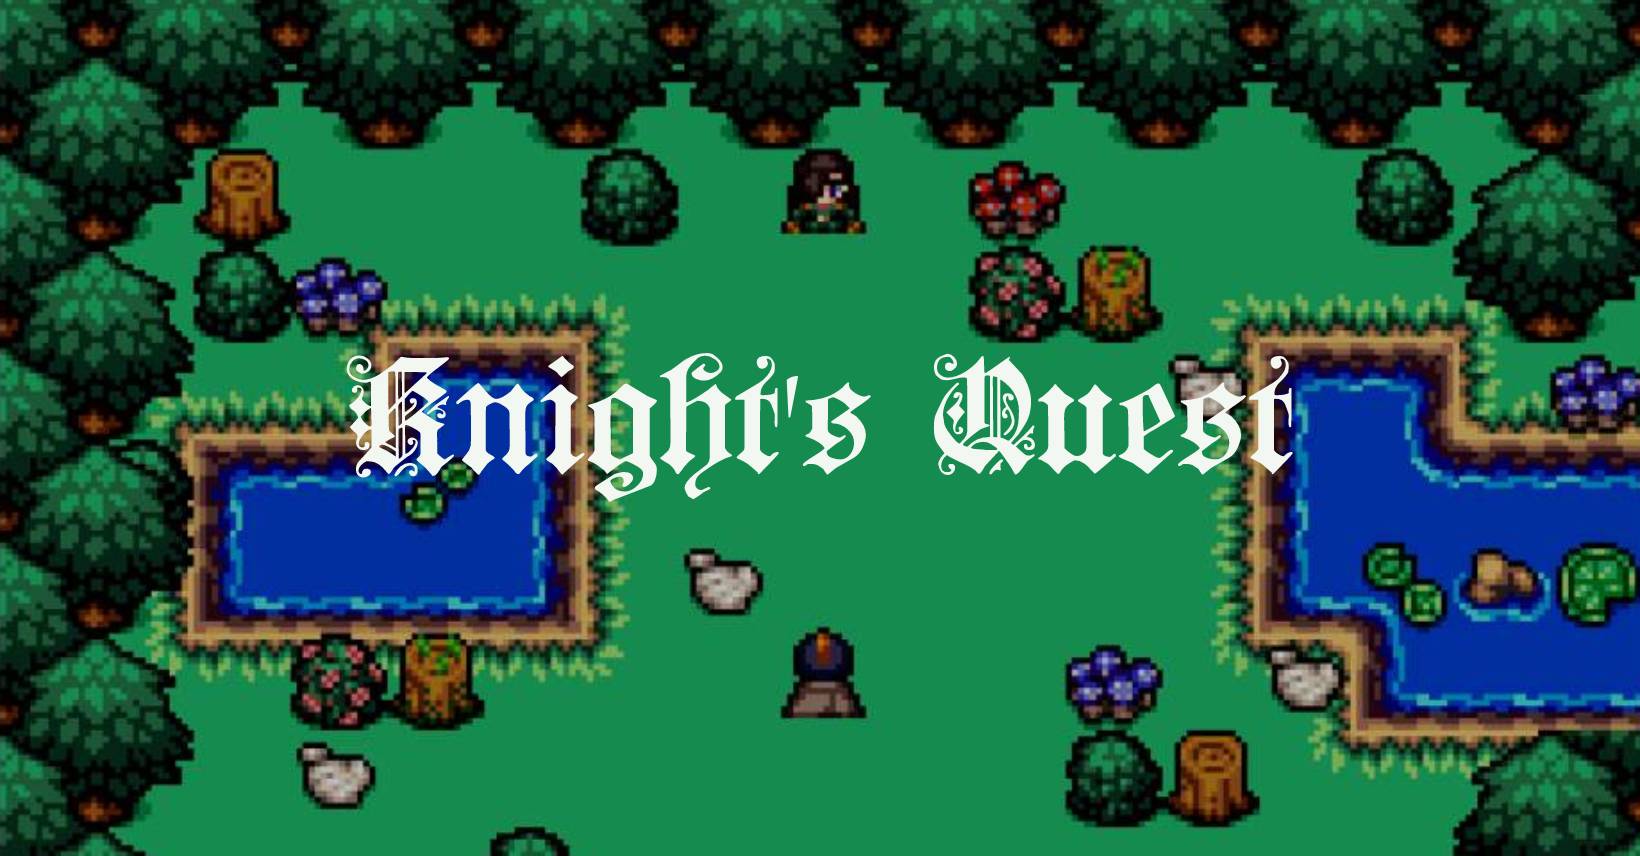 Knight's Quest